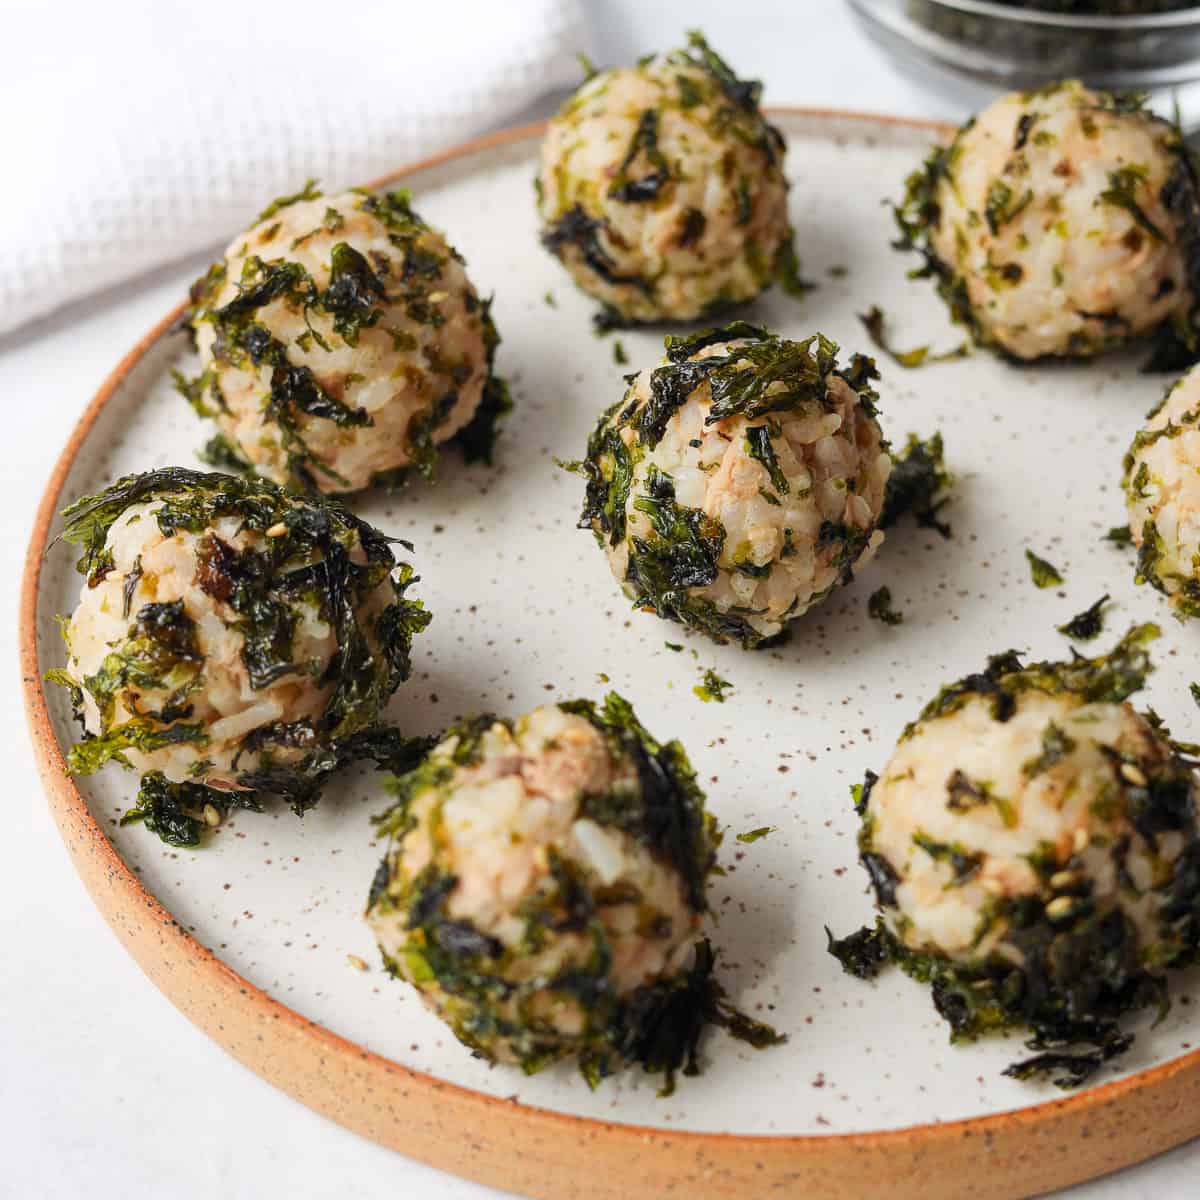 Healthy and Delicious! Enjoy Multigrain Rice Balls for a Simple Lunch!